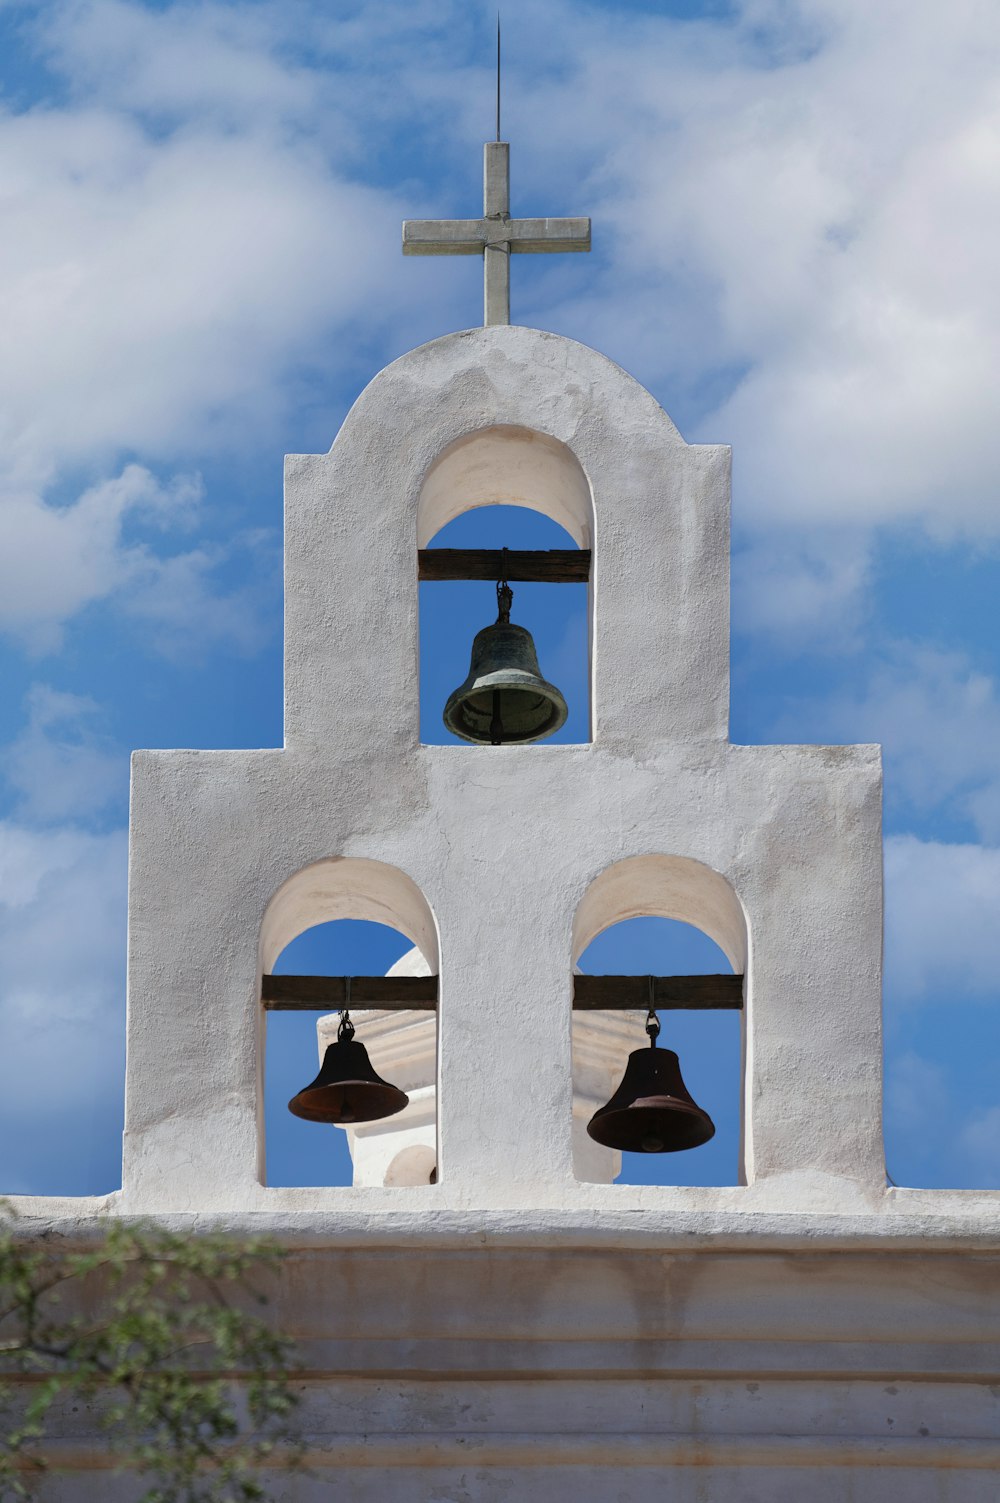 gray concrete bell under blue sky during daytime